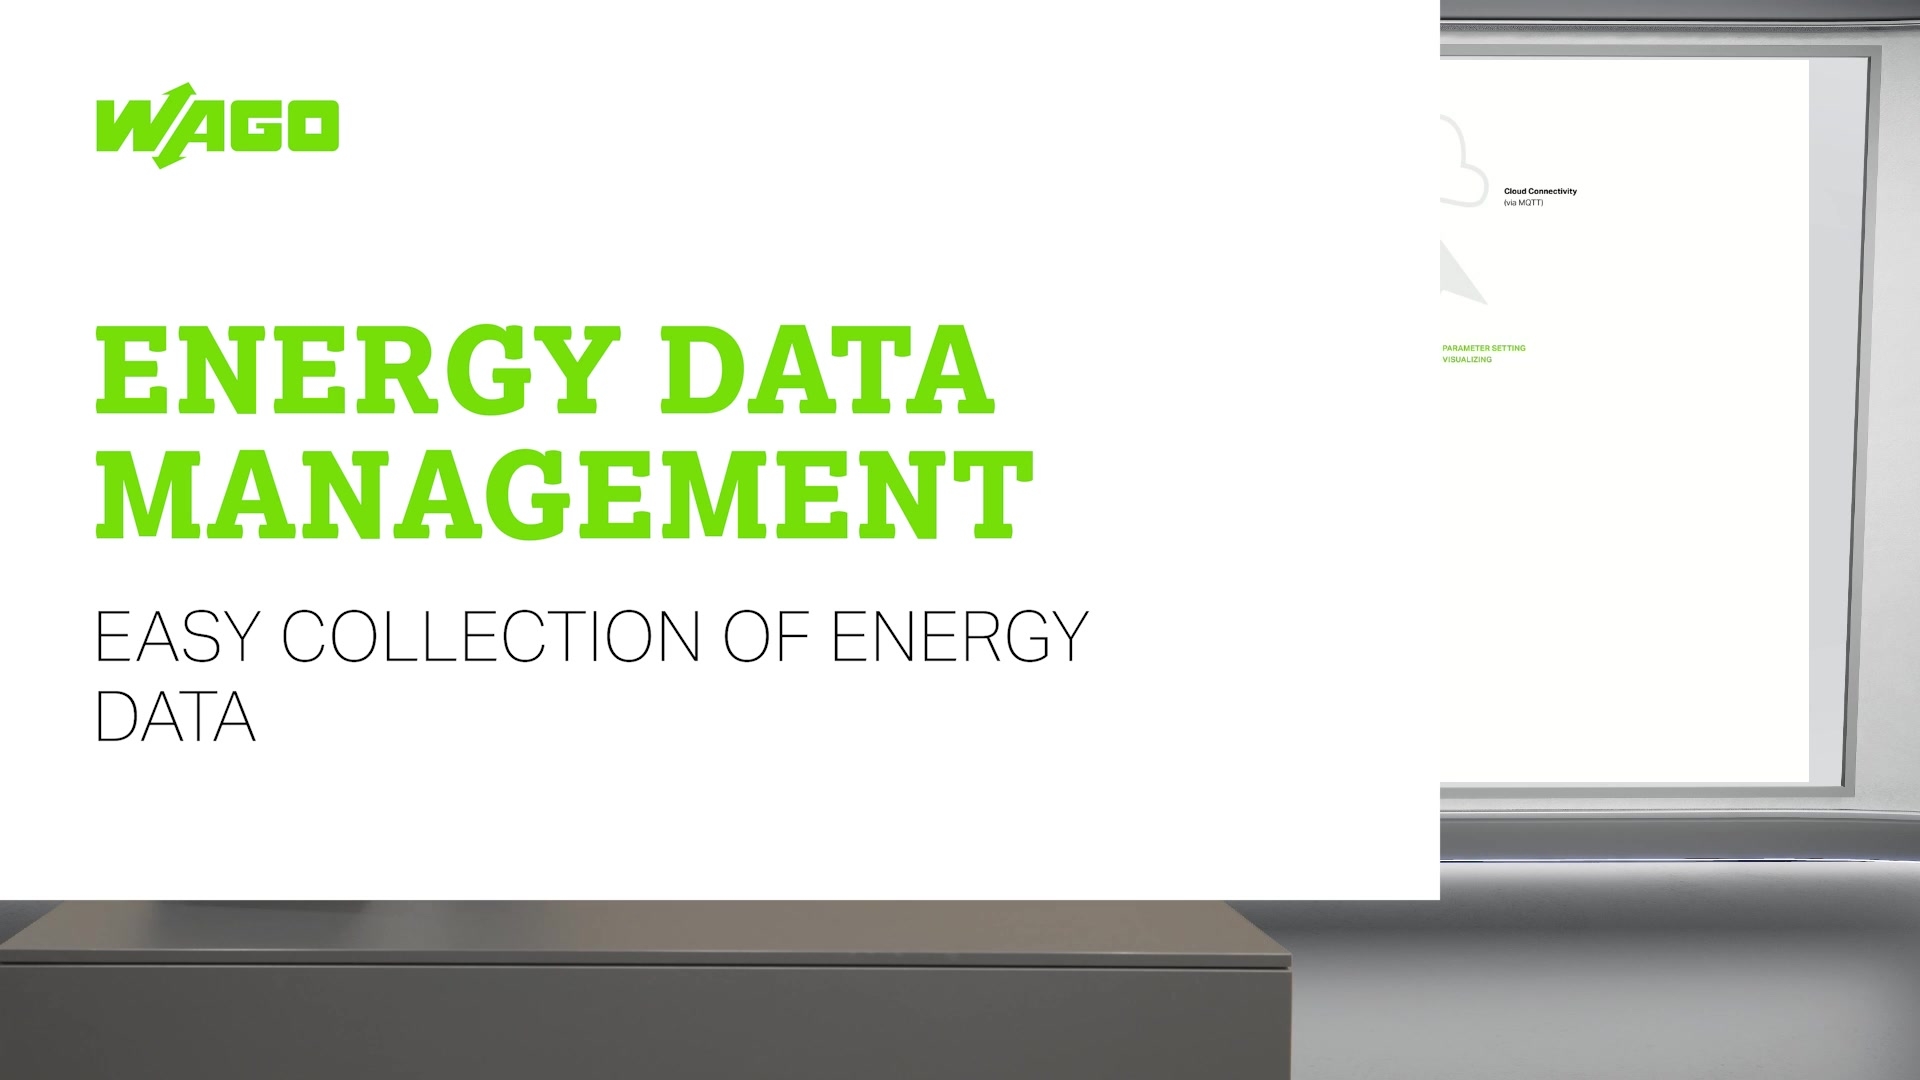 Easy collection of energy data